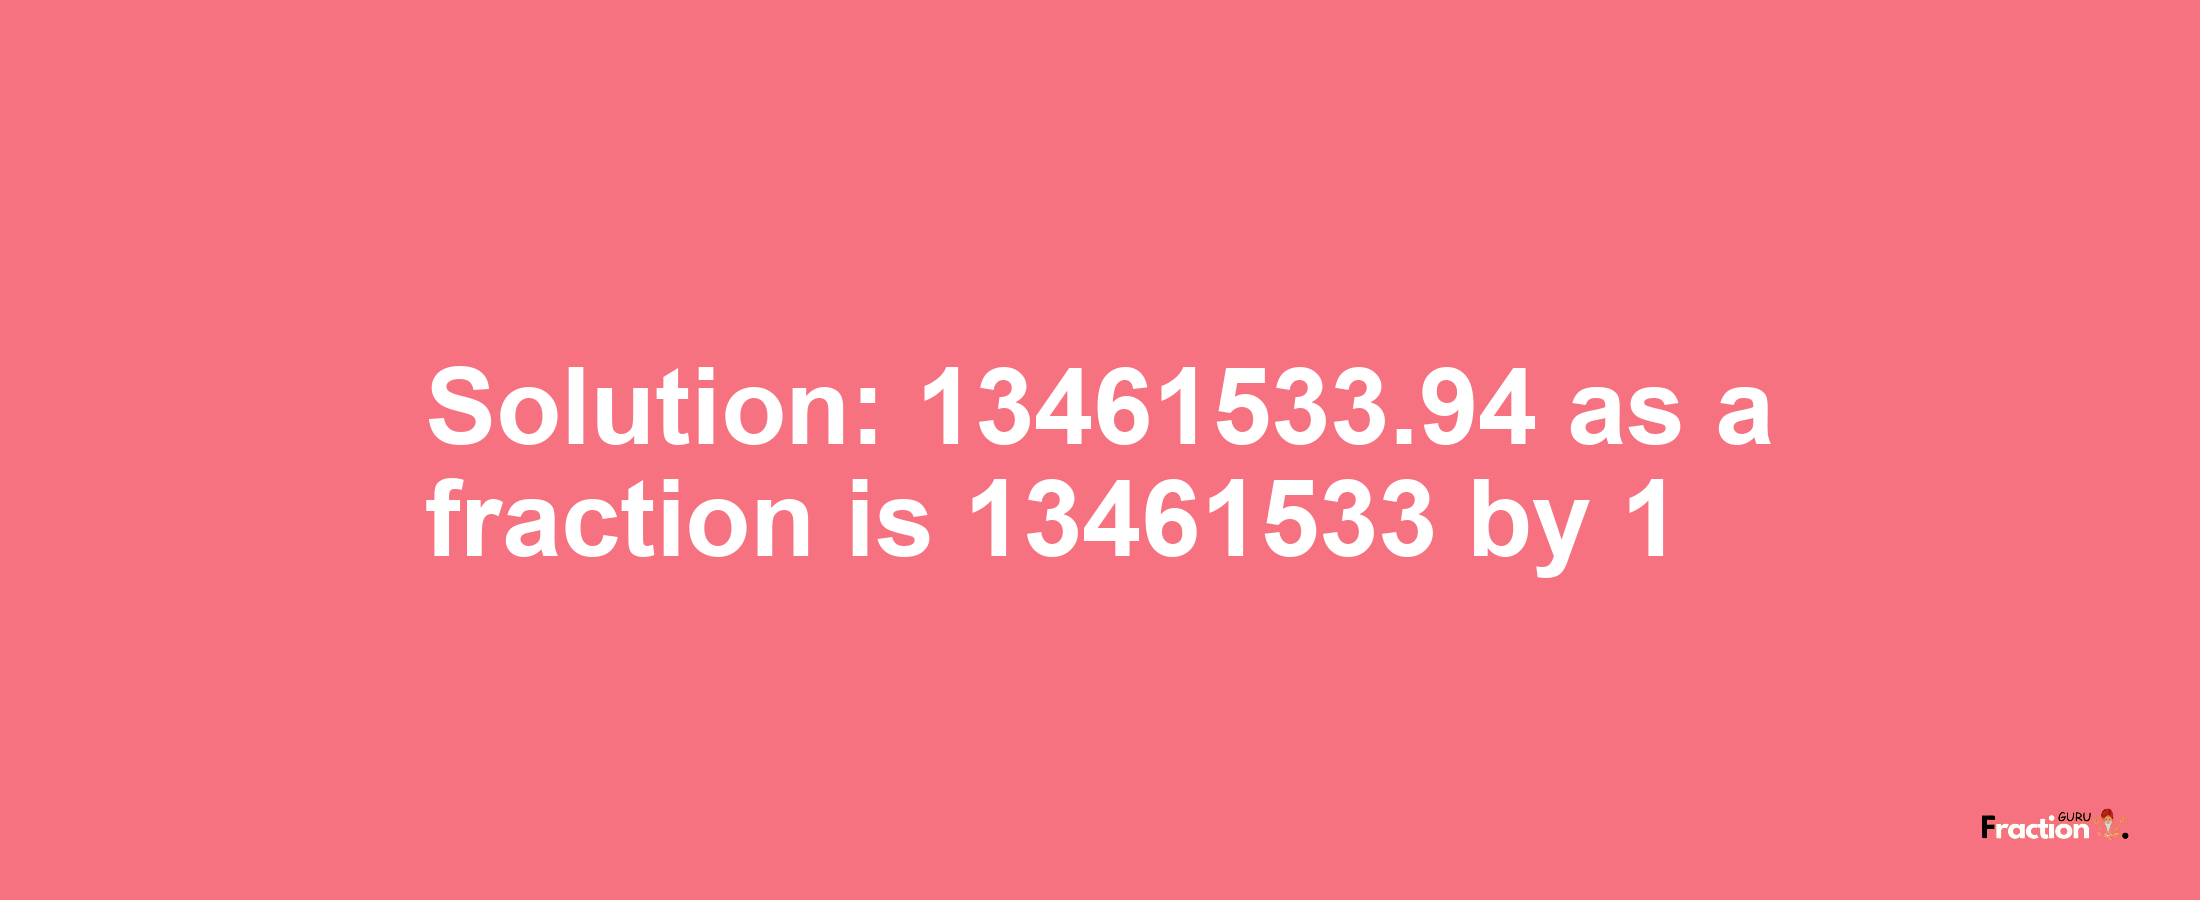 Solution:13461533.94 as a fraction is 13461533/1